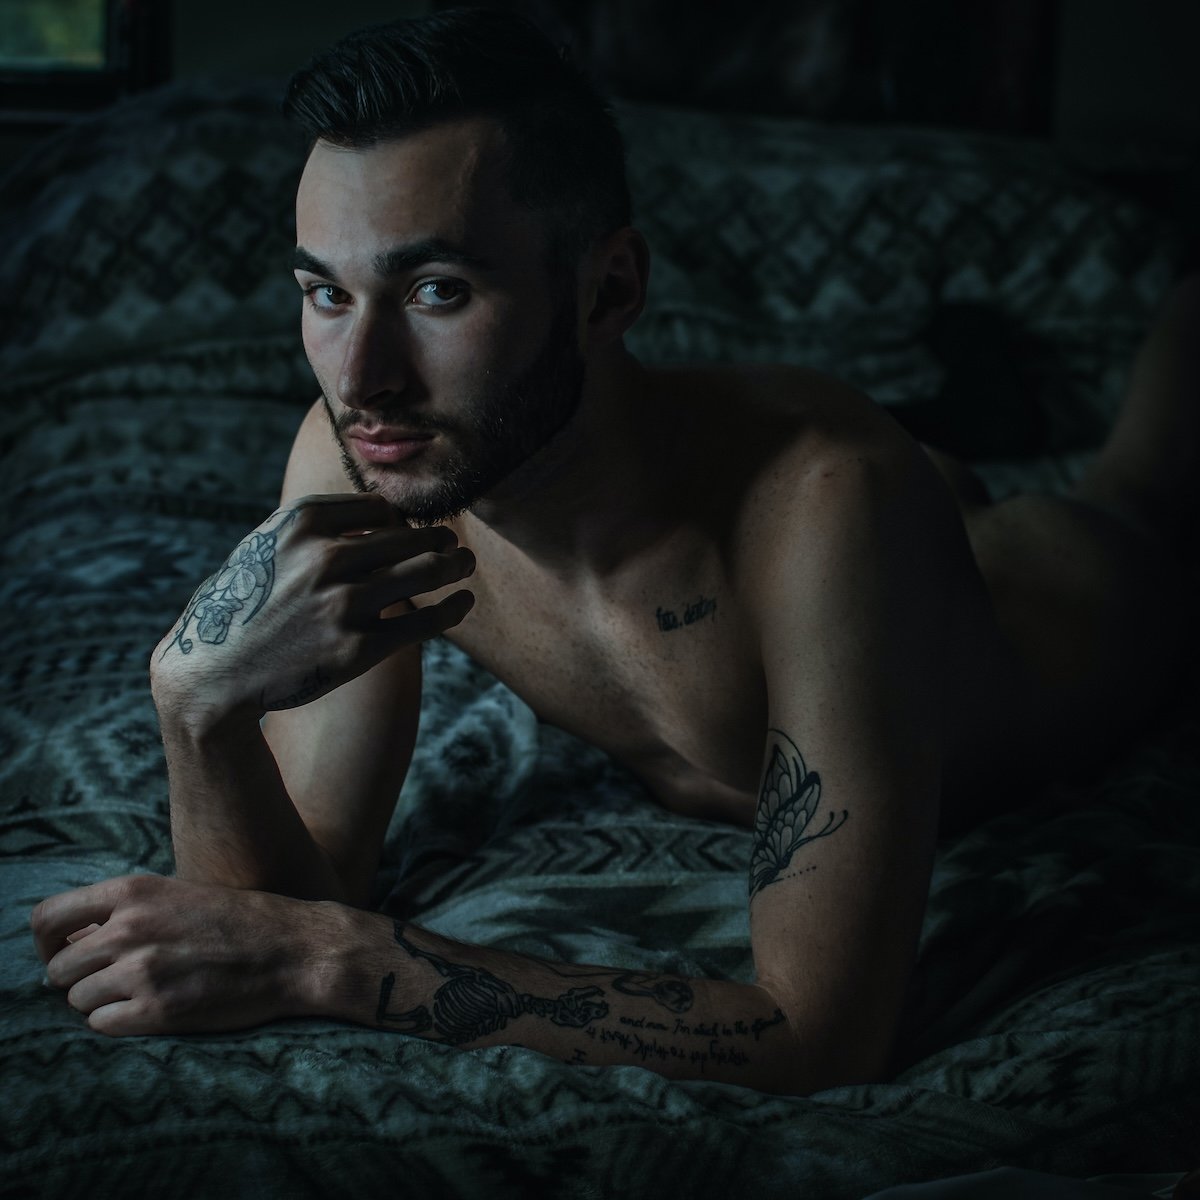 A male with tatoos posing in bed as an example for DIY boudoir photos